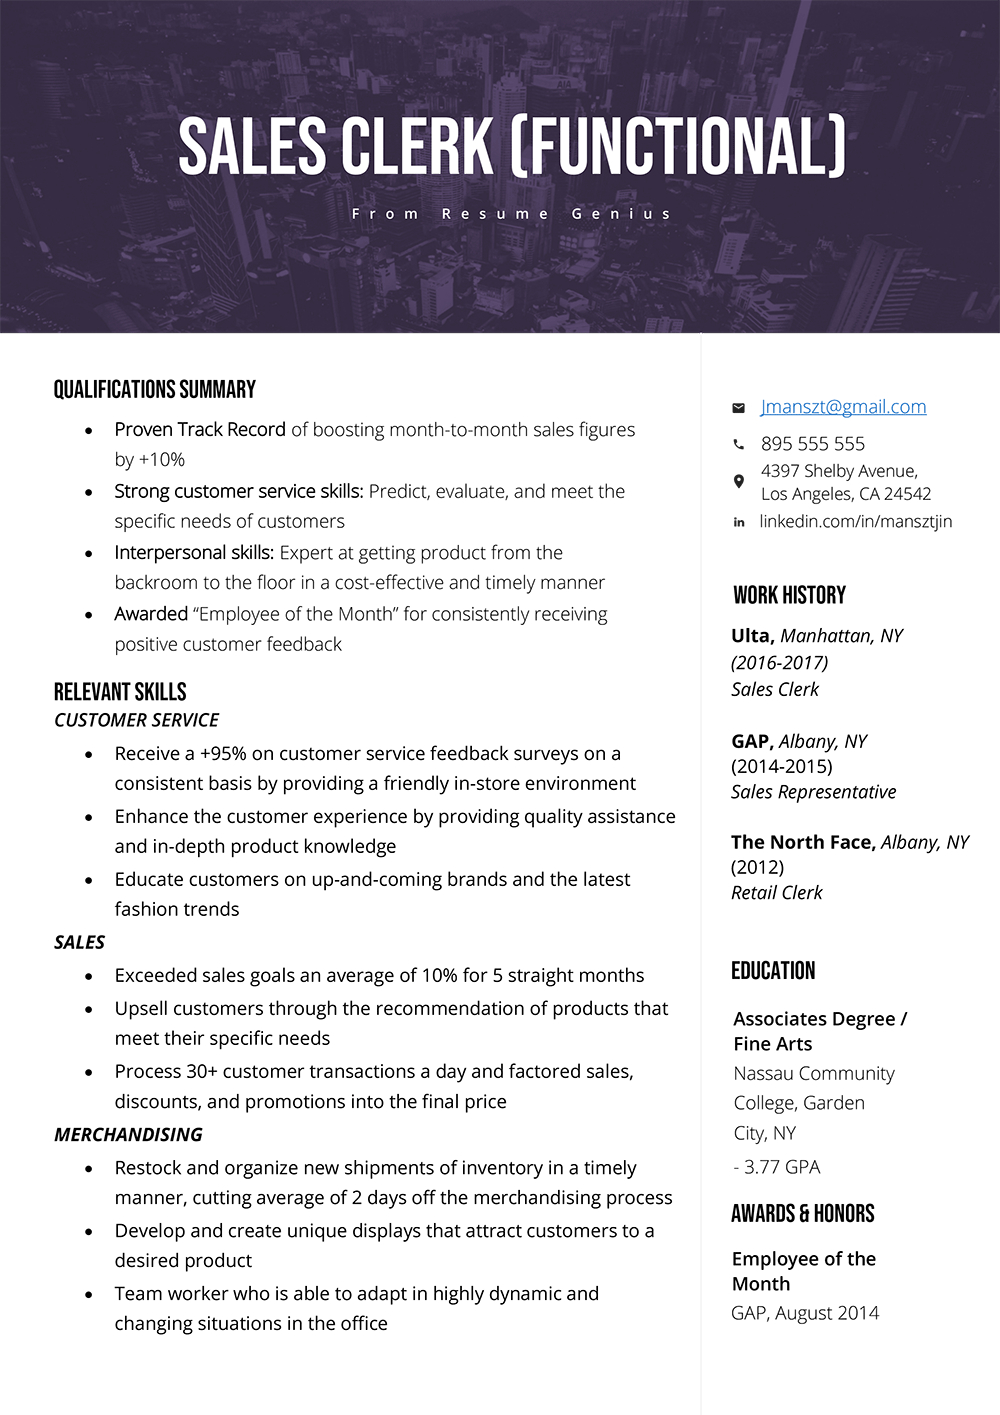 Resume Summary Examples How To Write A Qualifications Summary Resume Genius